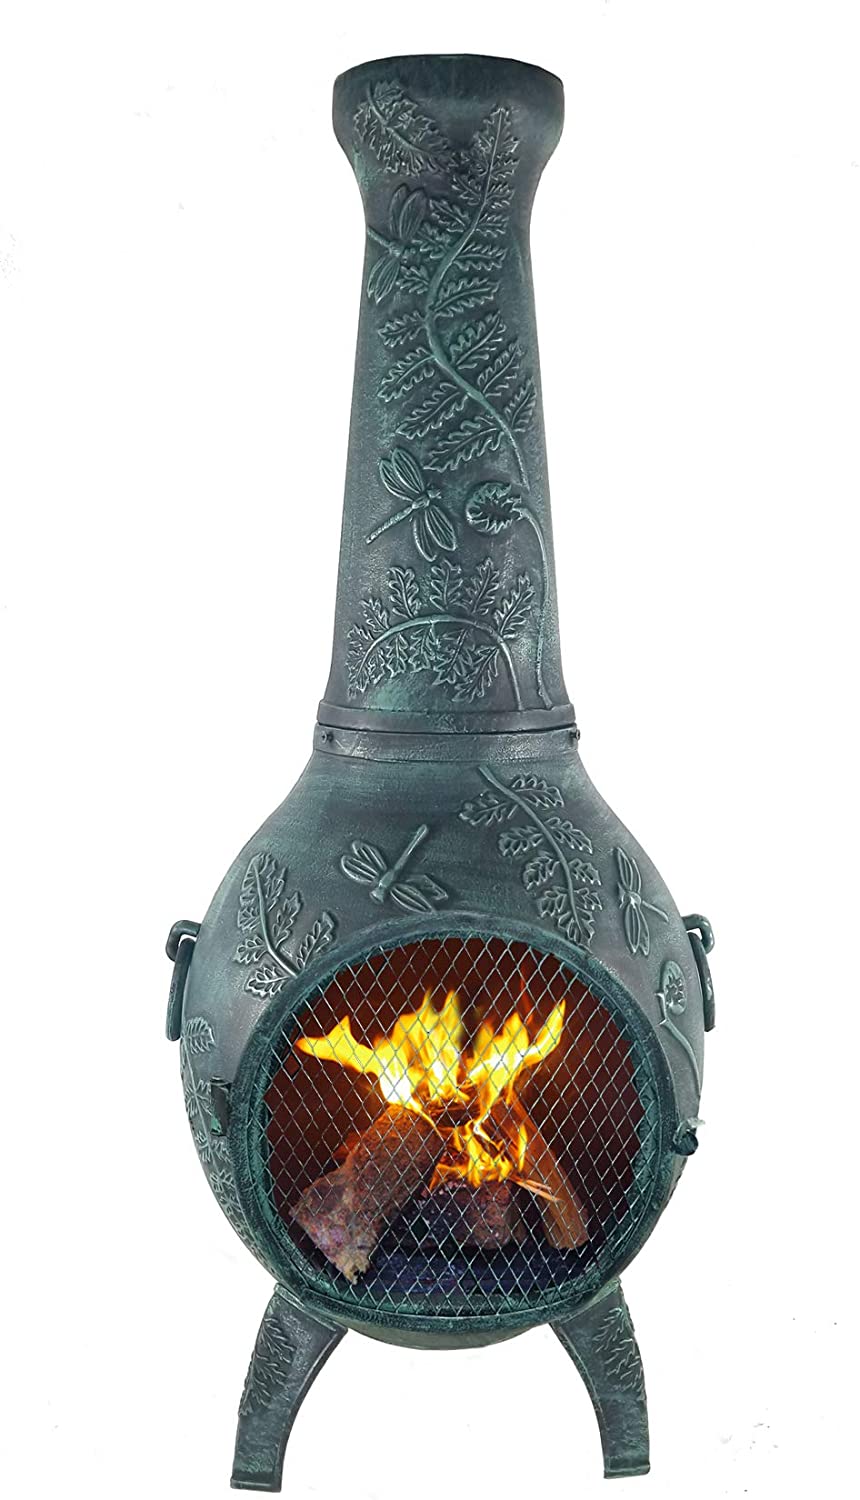 Buying A Cast Aluminum Chiminea The Perfect Outdoor Fireplace